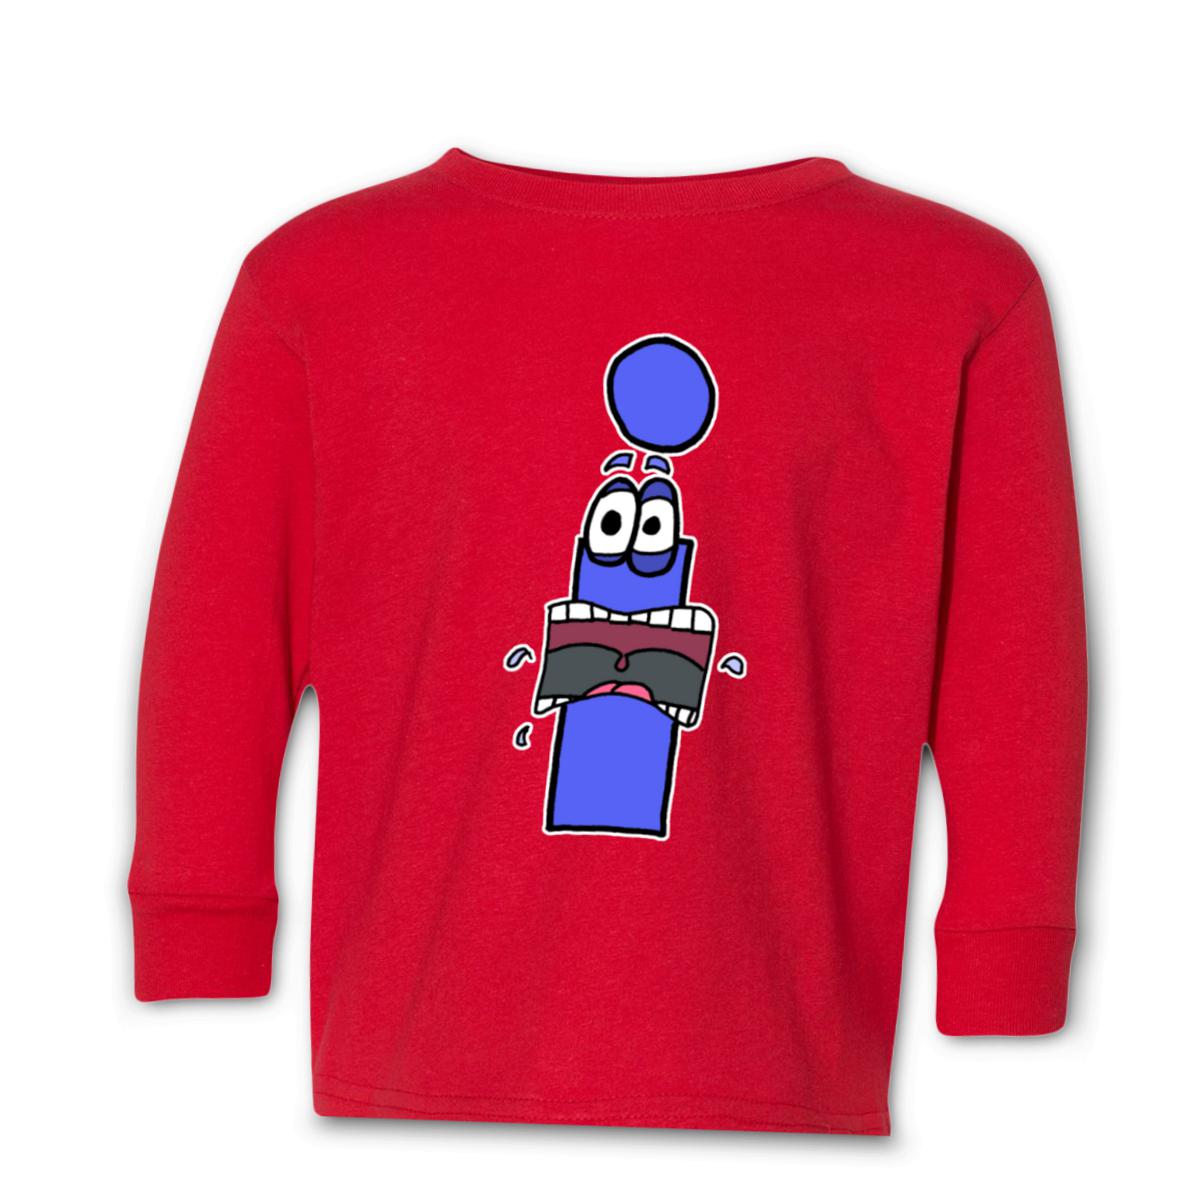 I Scream Toddler Long Sleeve Tee 56T red